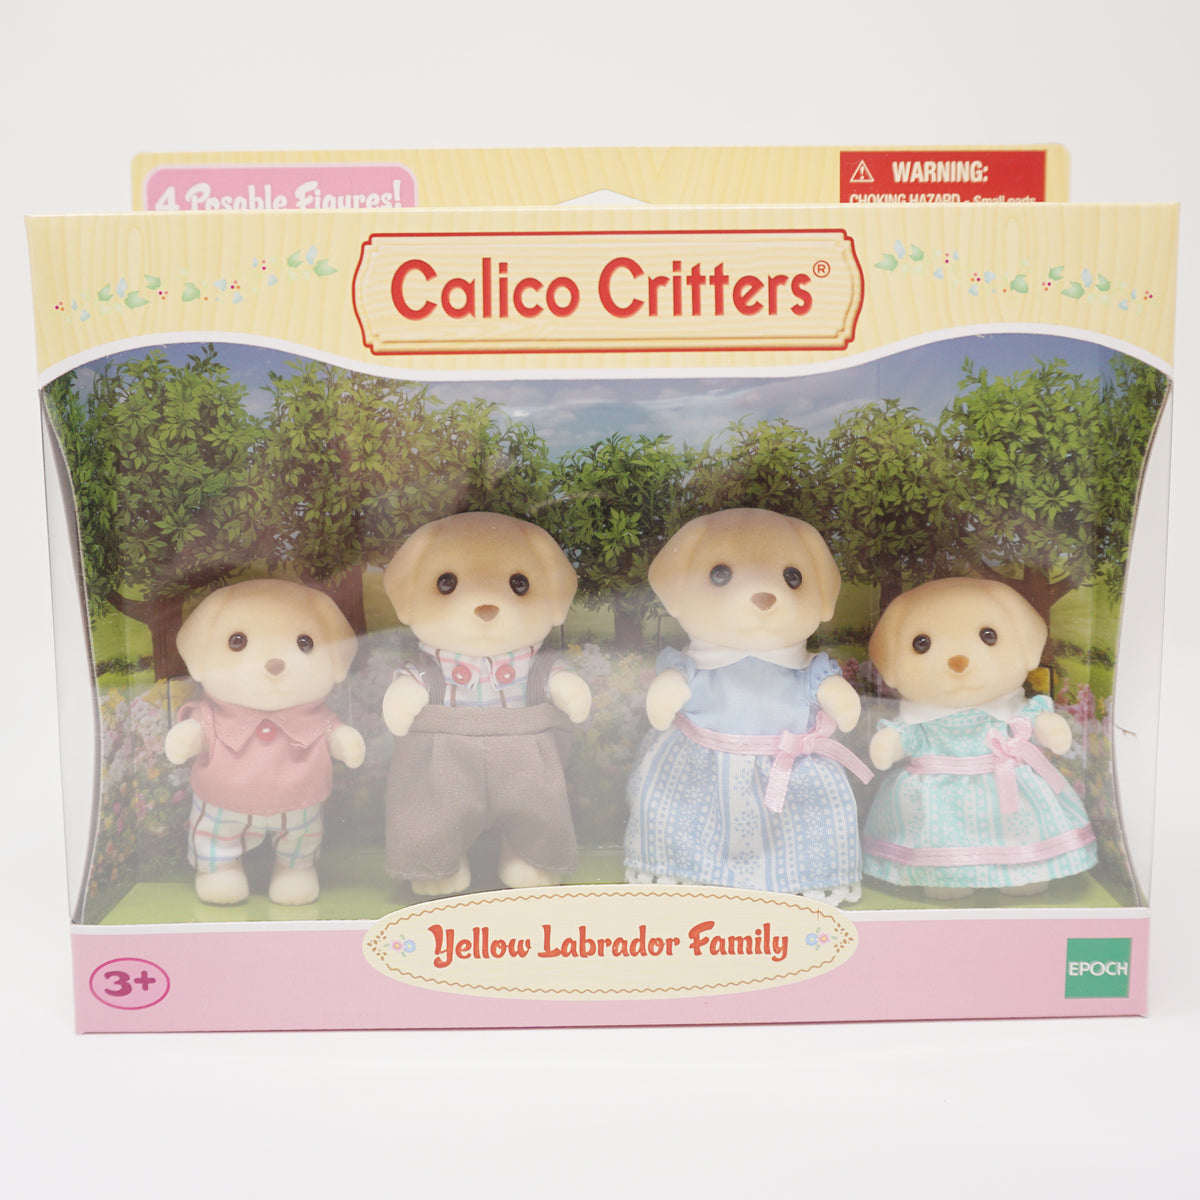 Calico Critters Yellow Labrador Family 3 Figures Toy Mom Dad Baby Girl Set 